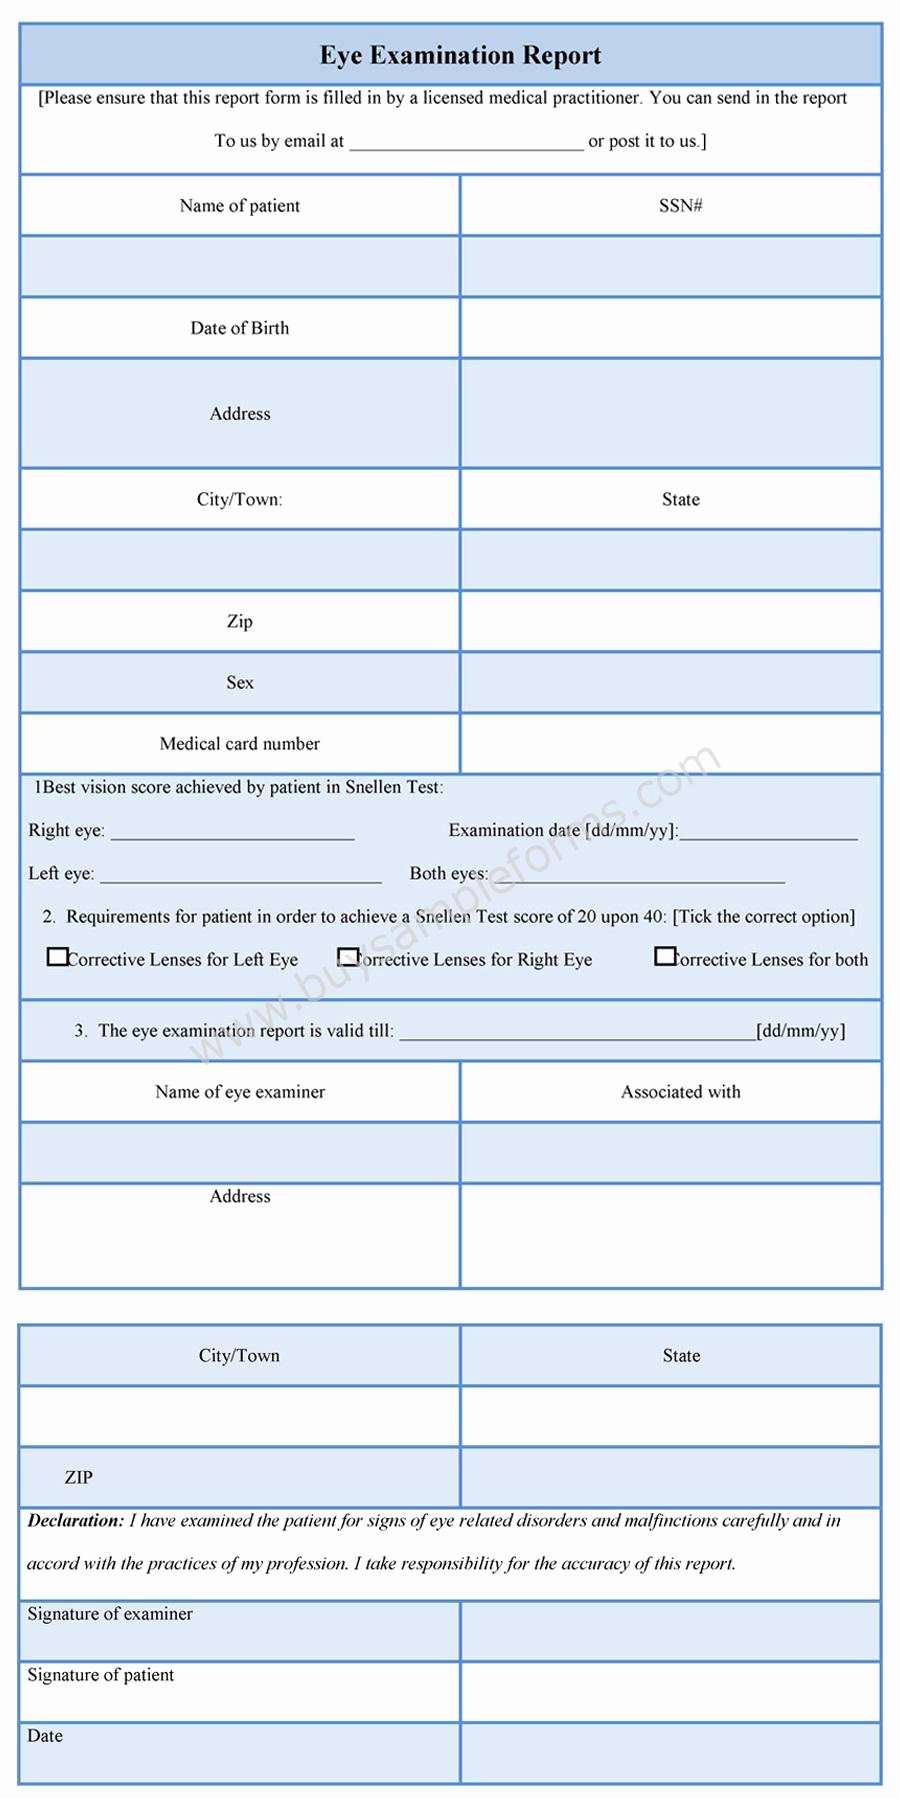 Eye Exam forms Template Luxury Eye Examination Report form Sample forms